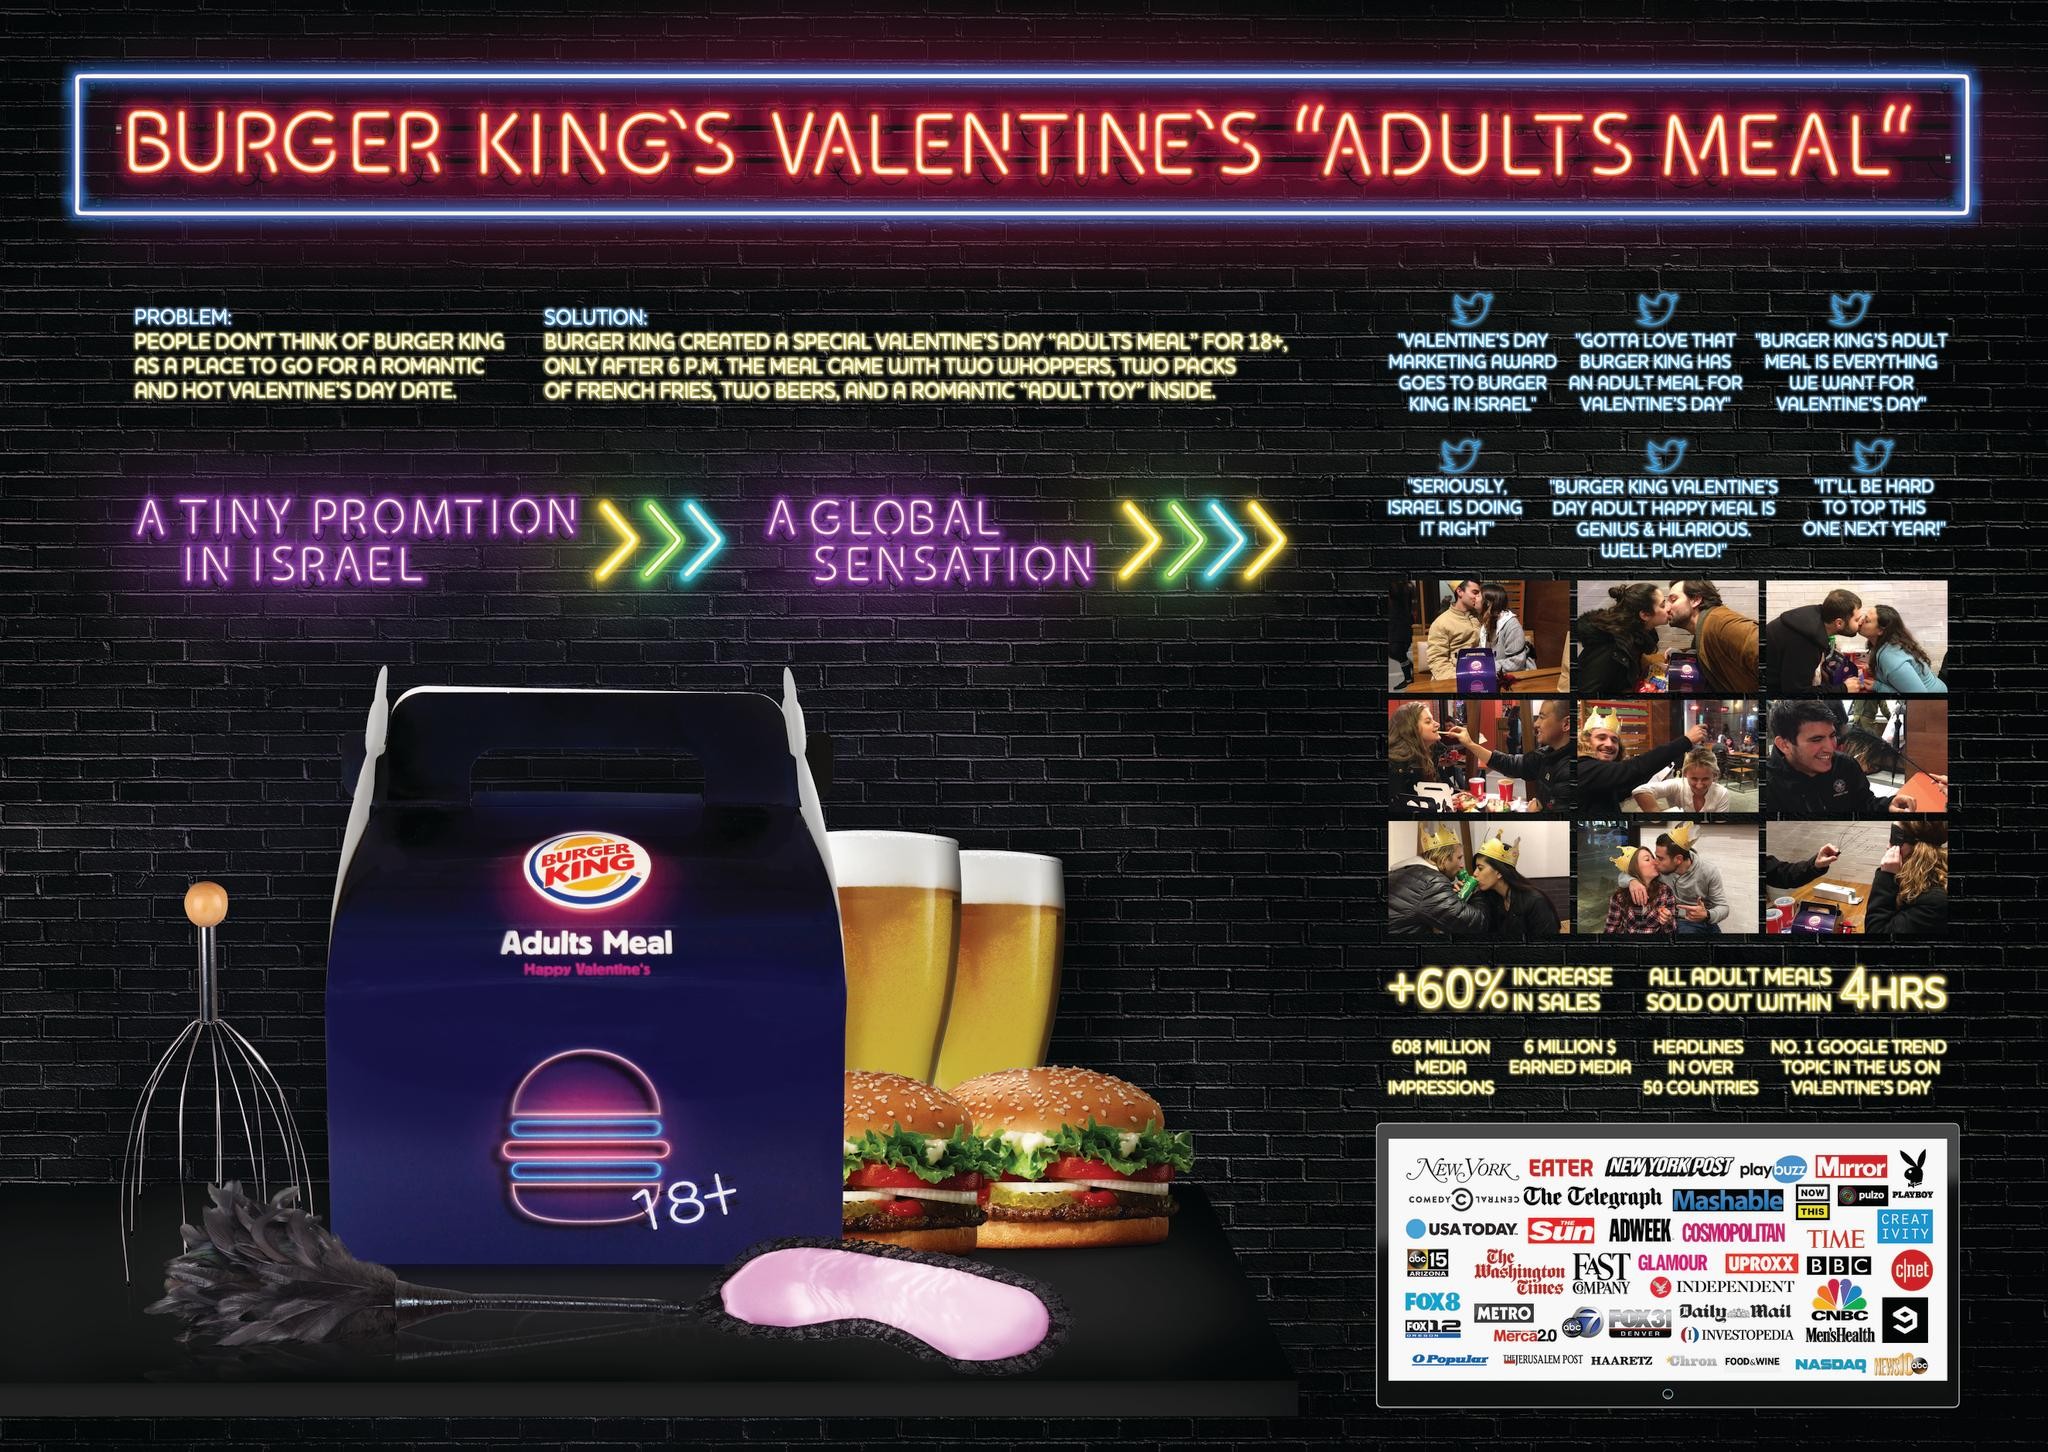 Valentine's "Adults Meal"